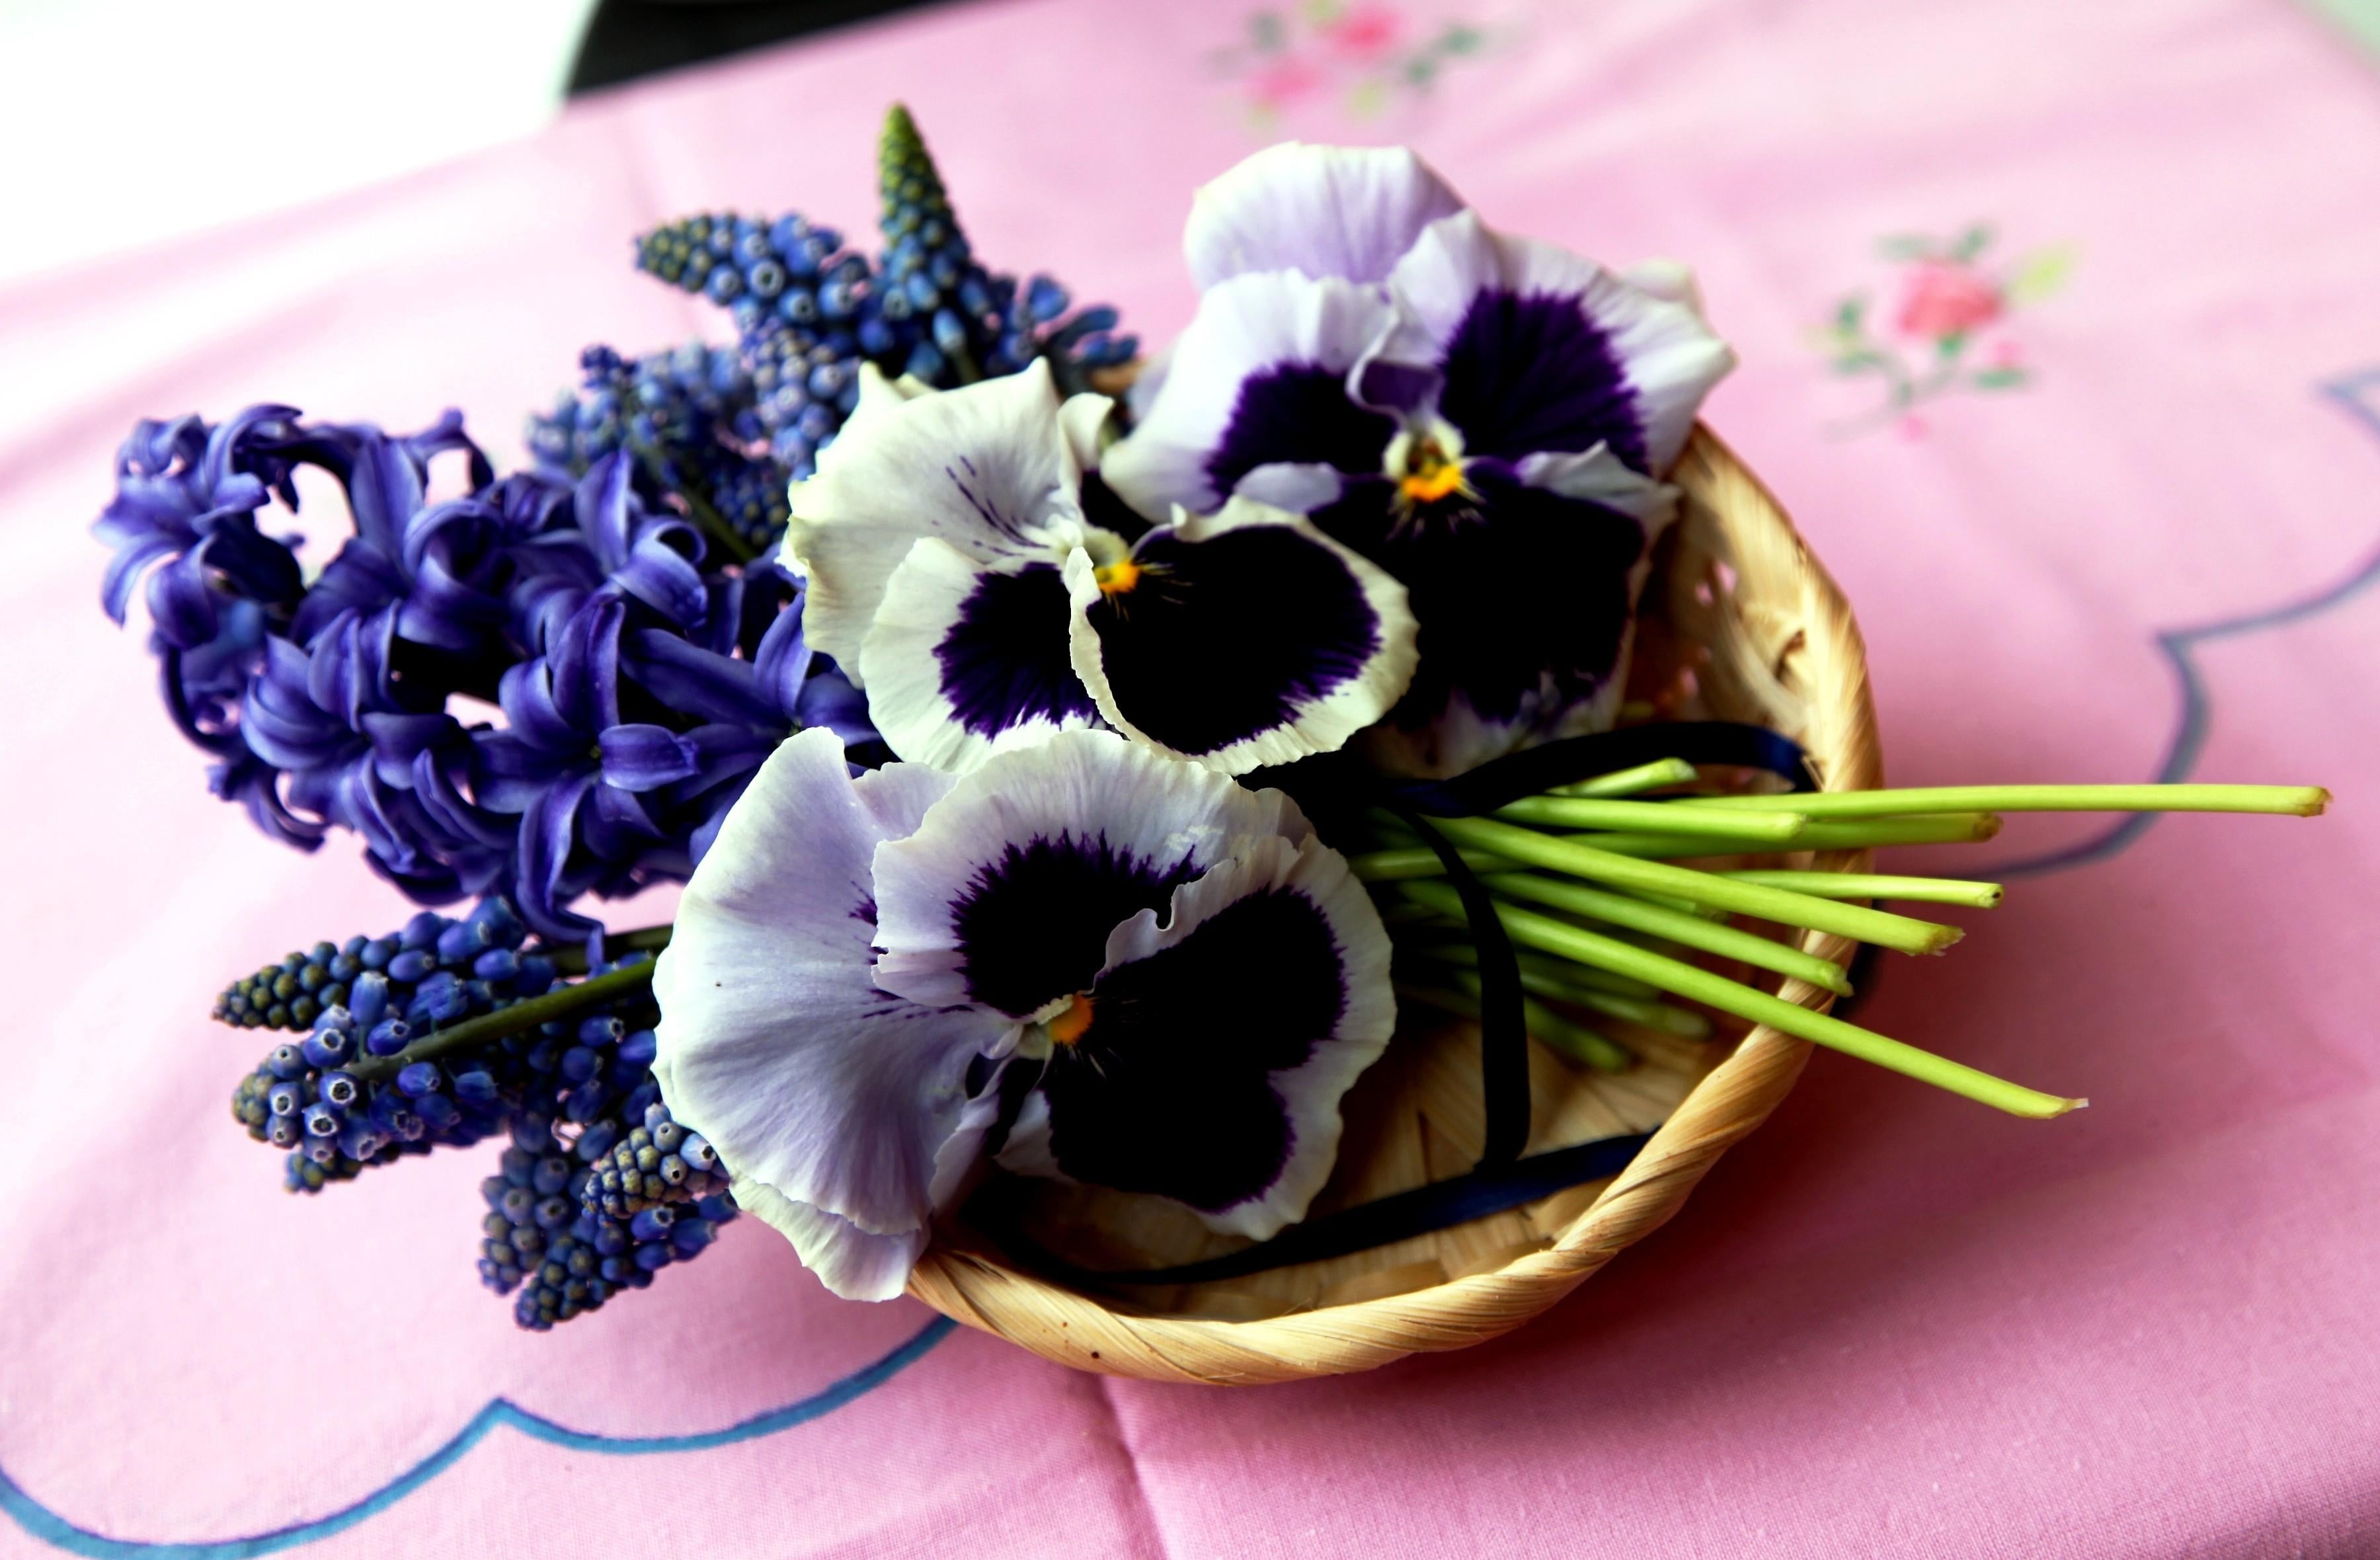 white-and-black flowers, hyacinth, muscari, pansies, bouquet